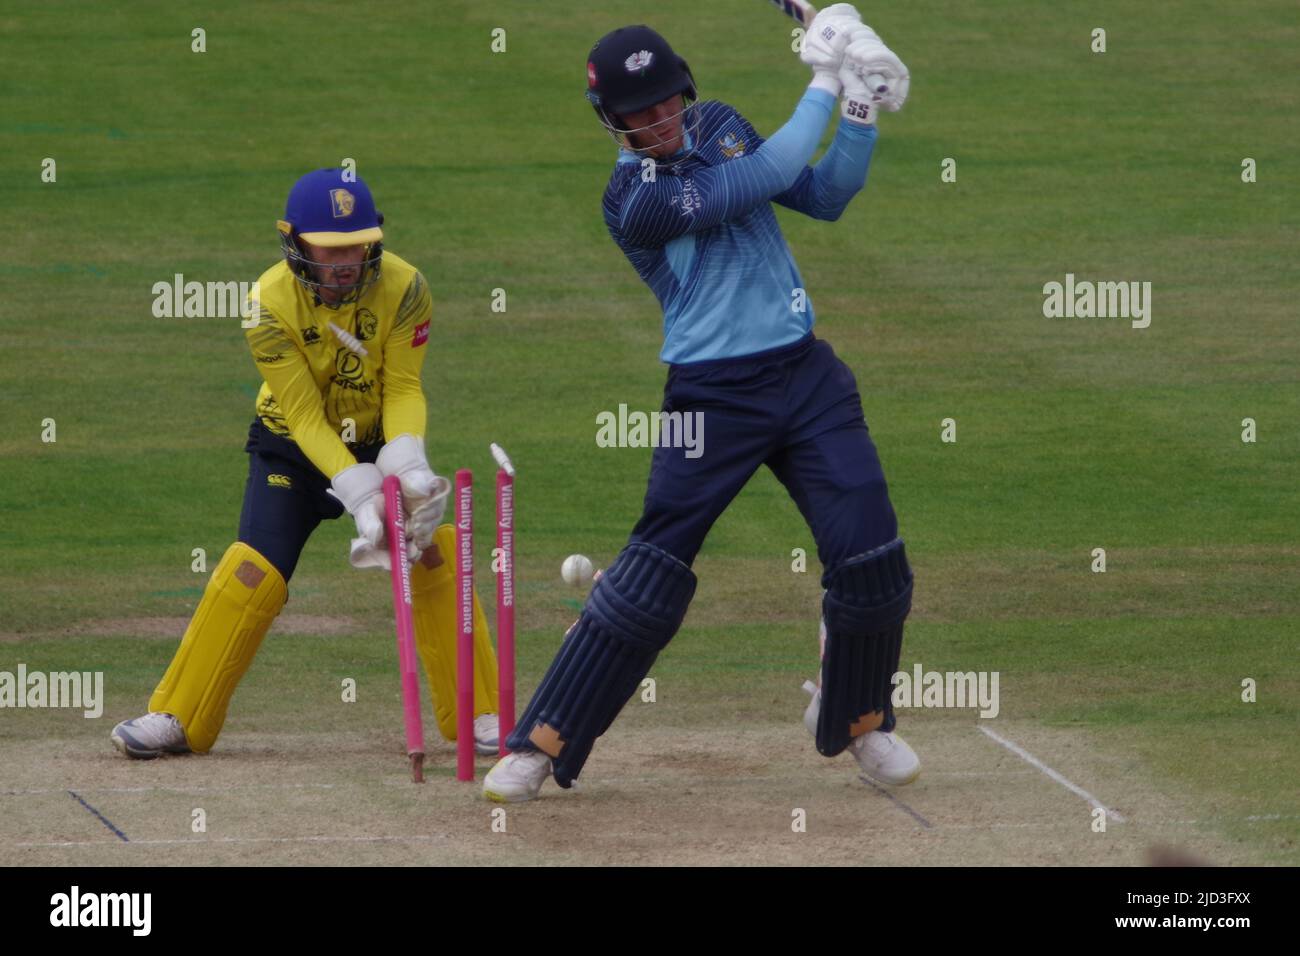 Chester le Street, UK. 8 June 2022. Finn Allen, batting for Yorkshire Vikings is bowled by Scott Borthwick during their Vitality Blast match at the Riverside. Credit: Colin Edwards Credit: Colin Edwards/Alamy Live News Stock Photo